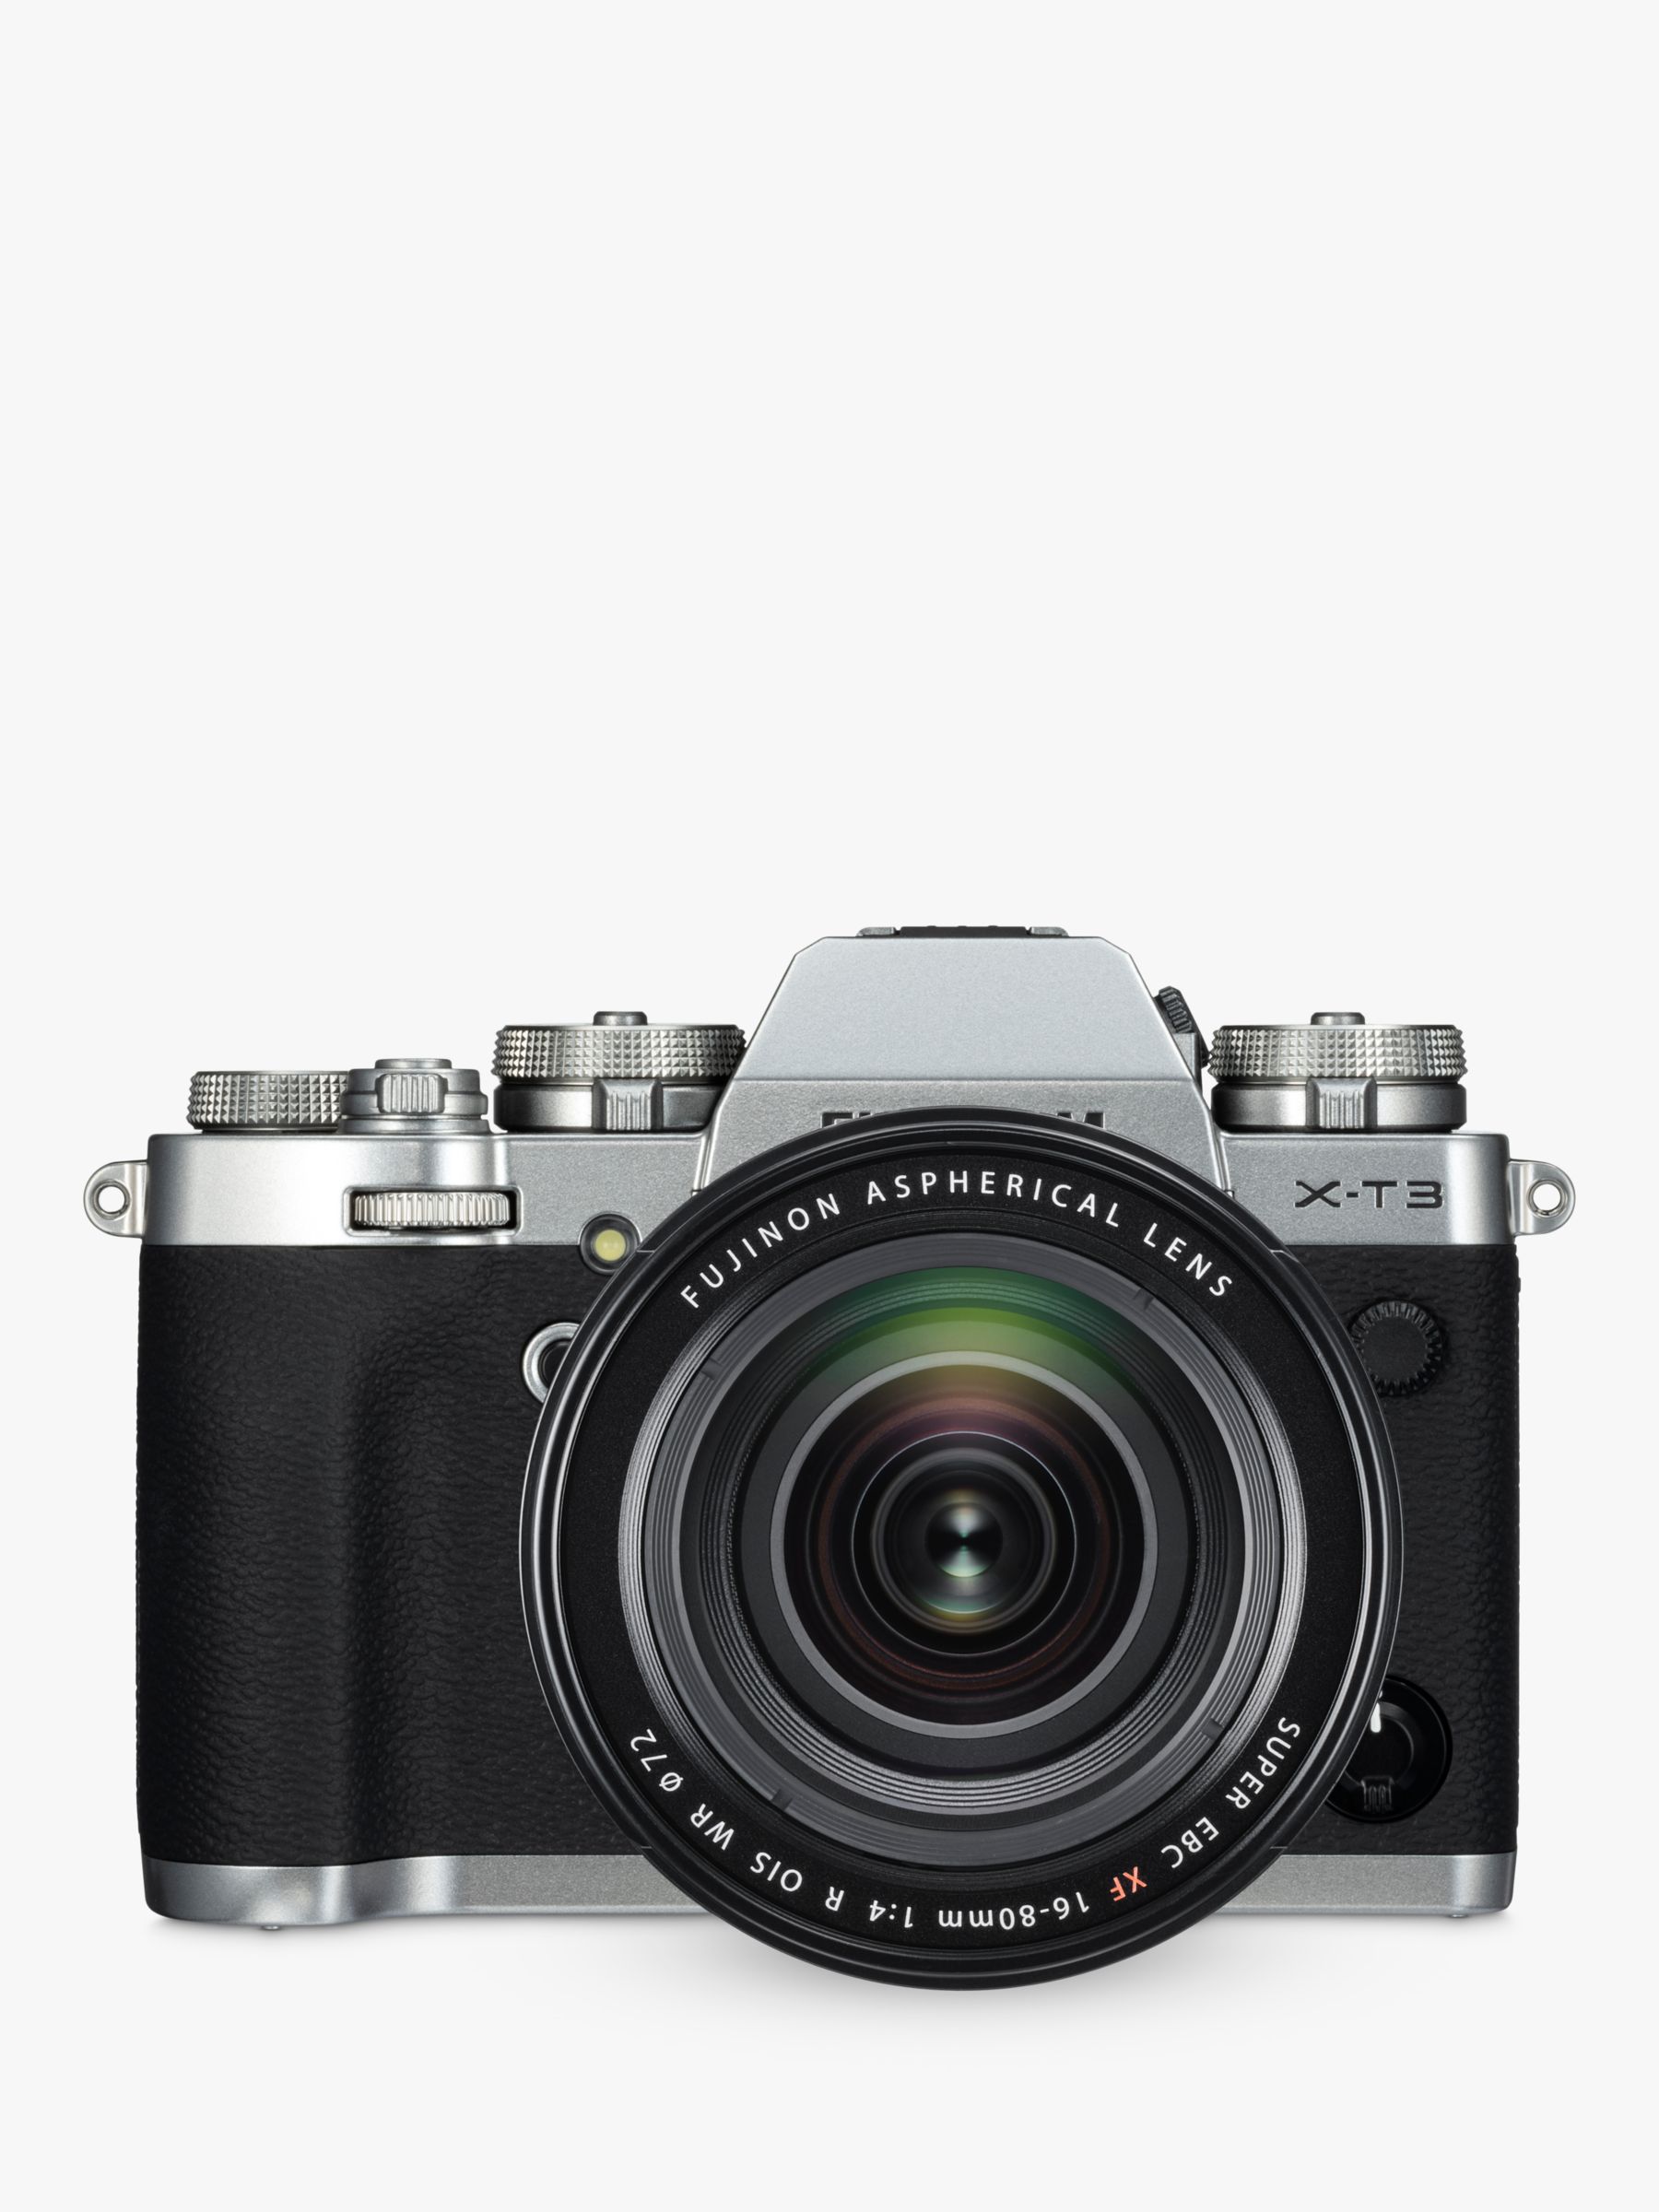 Image of Fujifilm XT3 Compact System Camera with XF 1680mm IS Lens 4K Ultra HD 261MP WiFi OLED EVF 3 LCD Touch Screen Silver